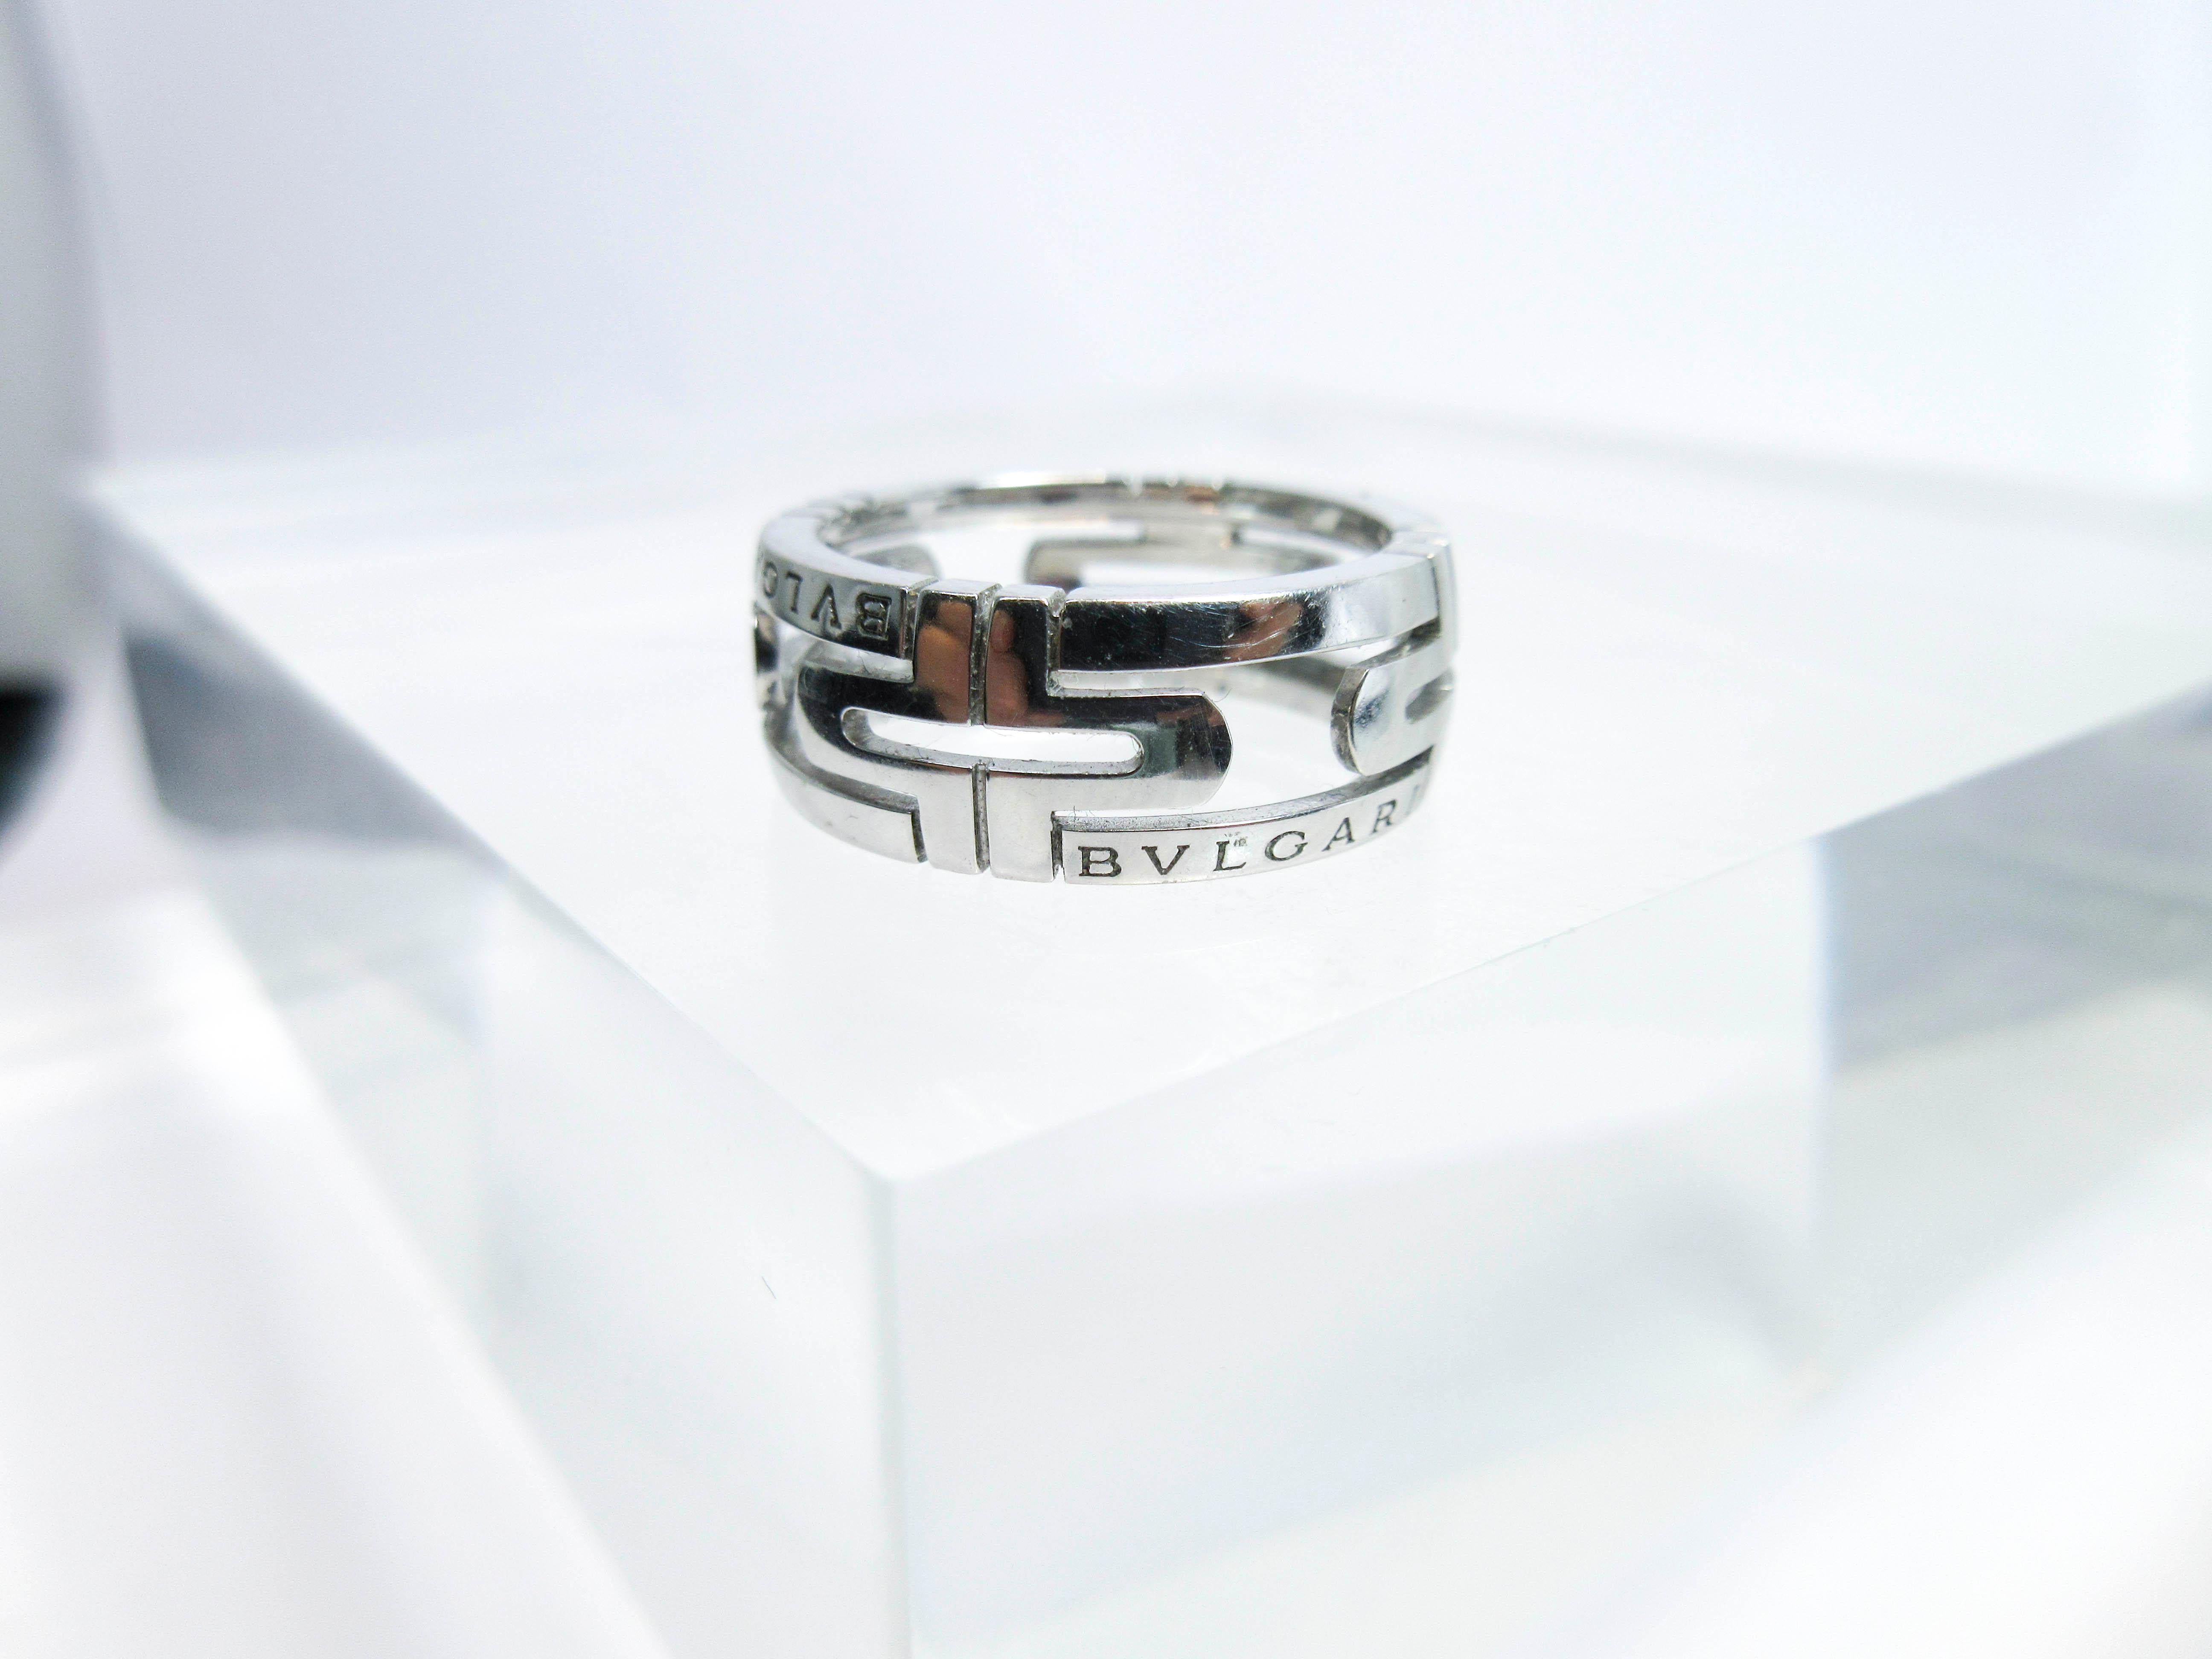 This Bulgari design is composed of 18KT white gold. Size 6.5. Please feel free to ask us any questions you may have.